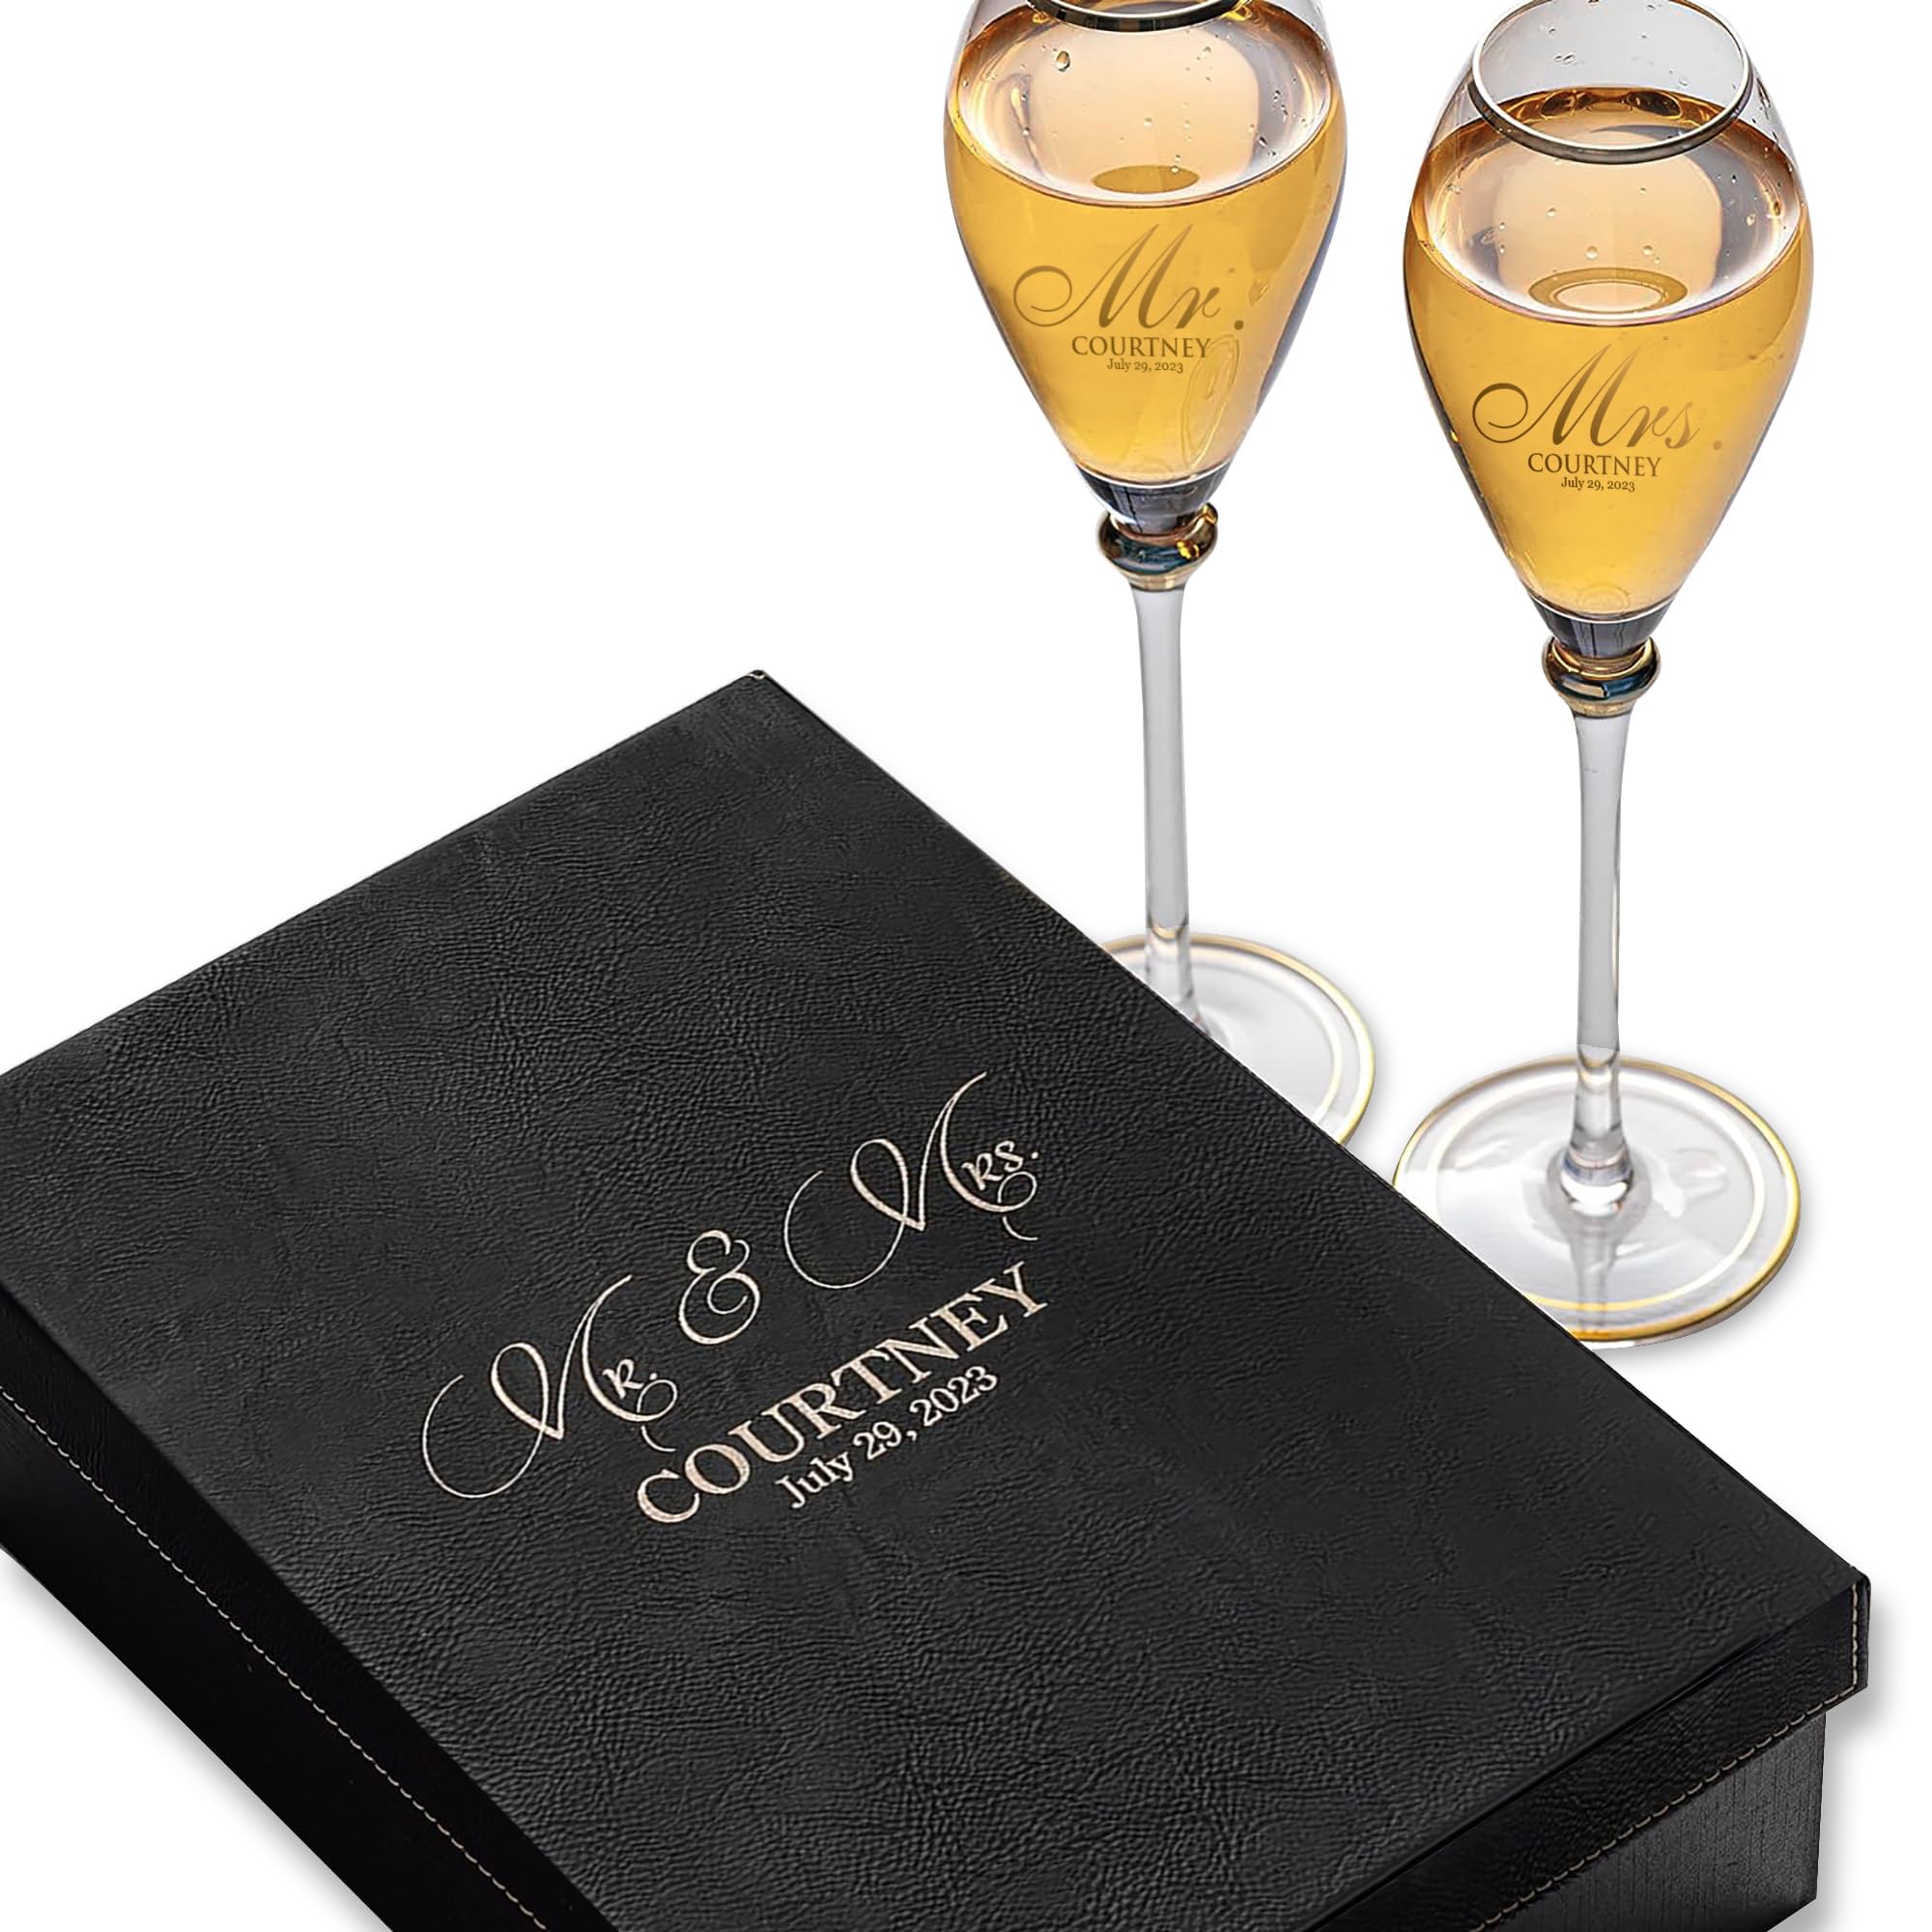 Krezy Case Set of 2 Personalized Wedding Engraved Champagne Flutes- Mr and Mrs Design - For Weddings,Parties and Anniversary